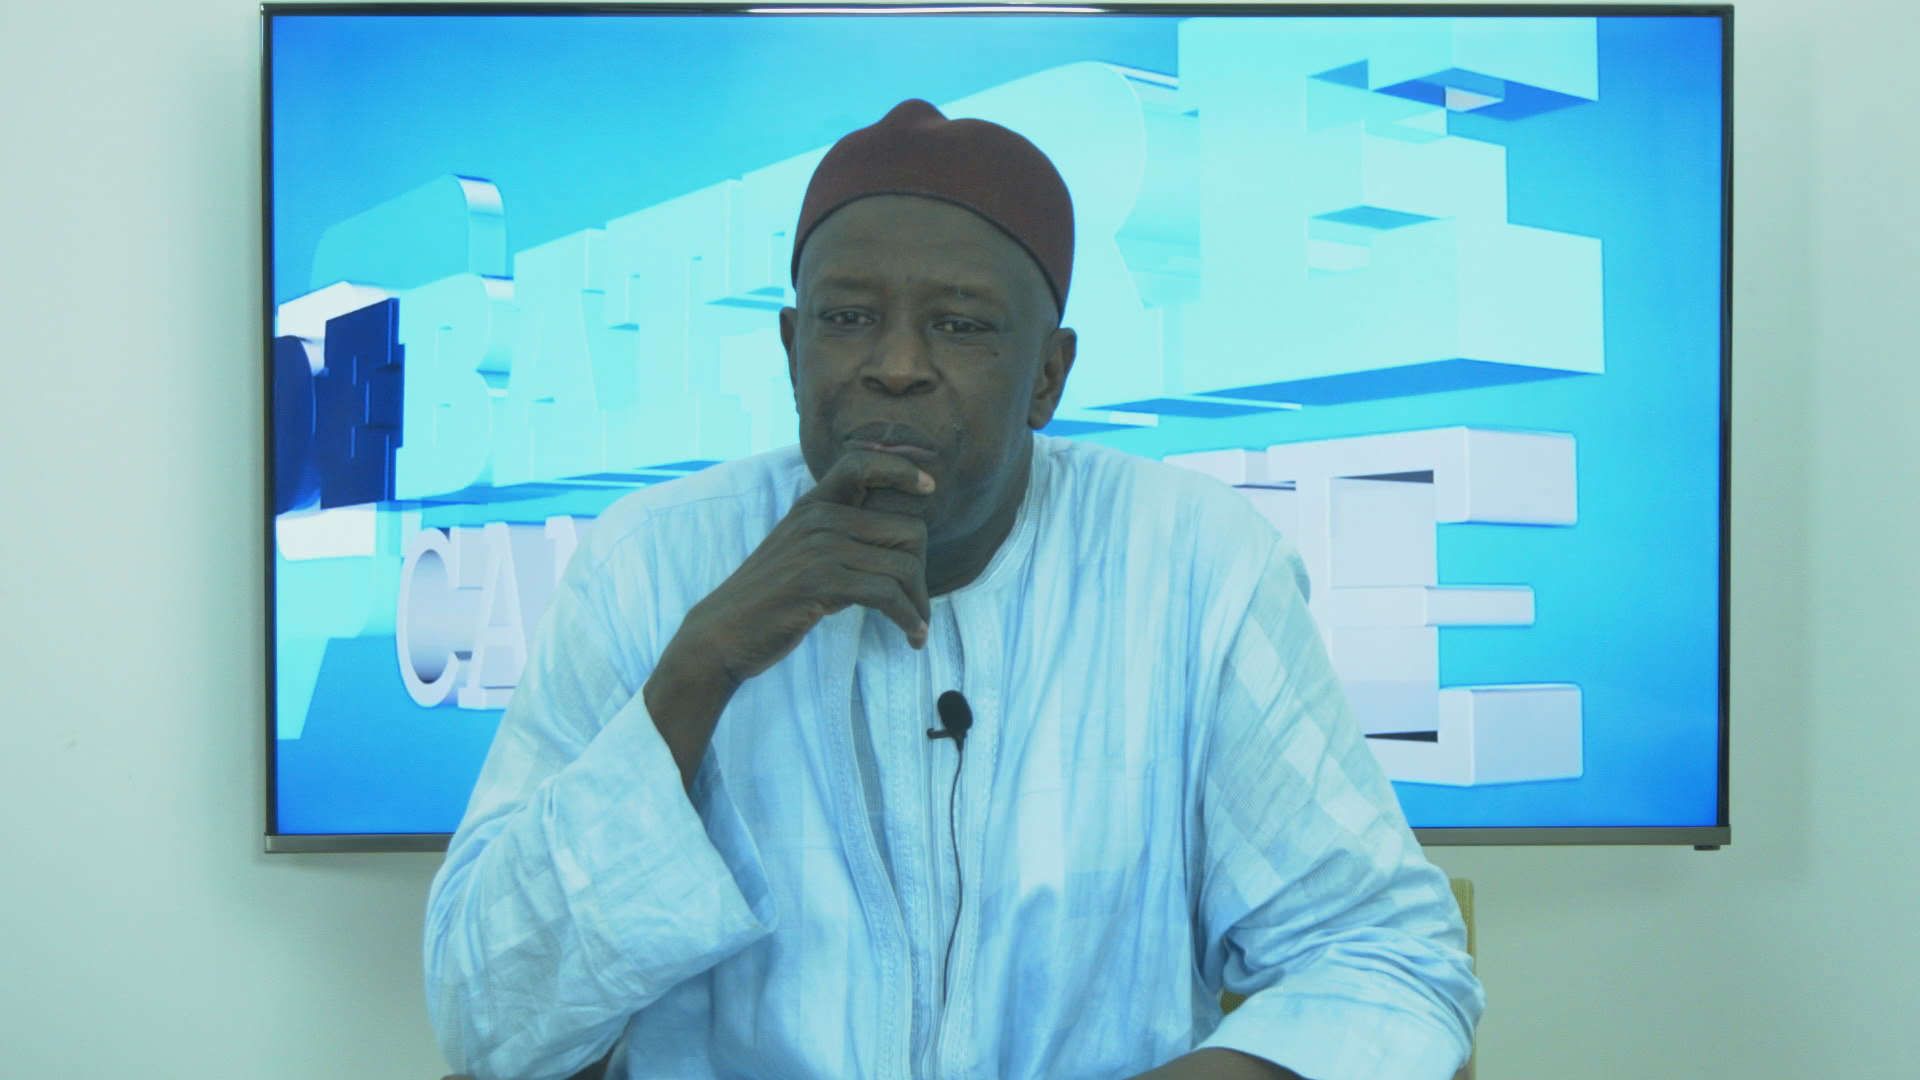 Serigne Mansour Sy Djamil : « Macky Sall n’a rien fait pour qu’on oublie Abdoulaye Wade »